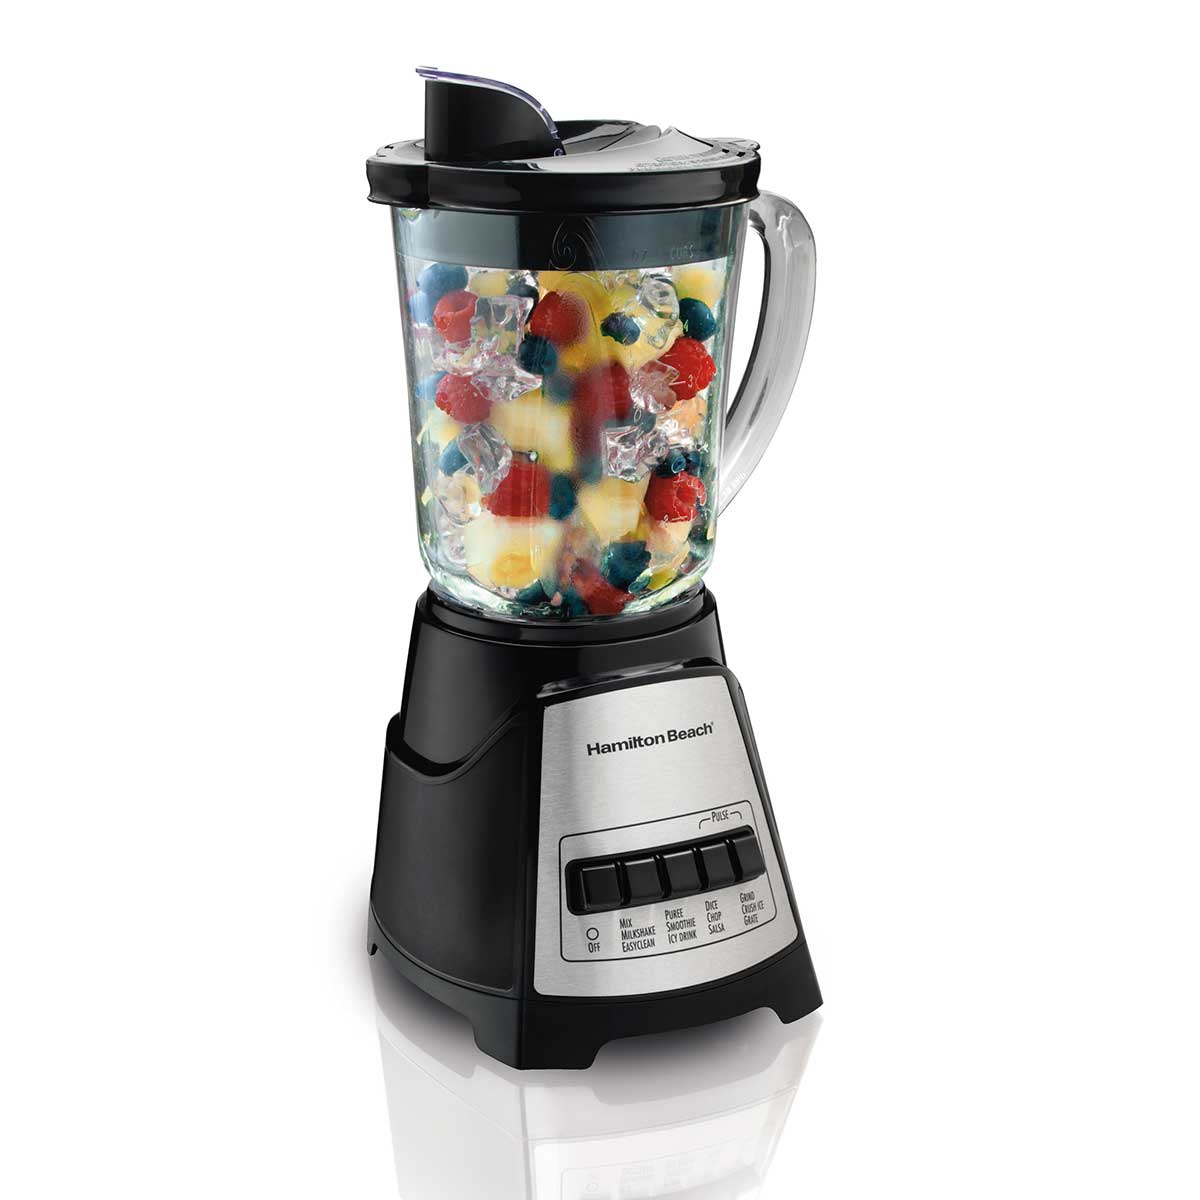 🔥 Best Personal Blender for Crushing Ice in 2021 ☑️ TOP 5